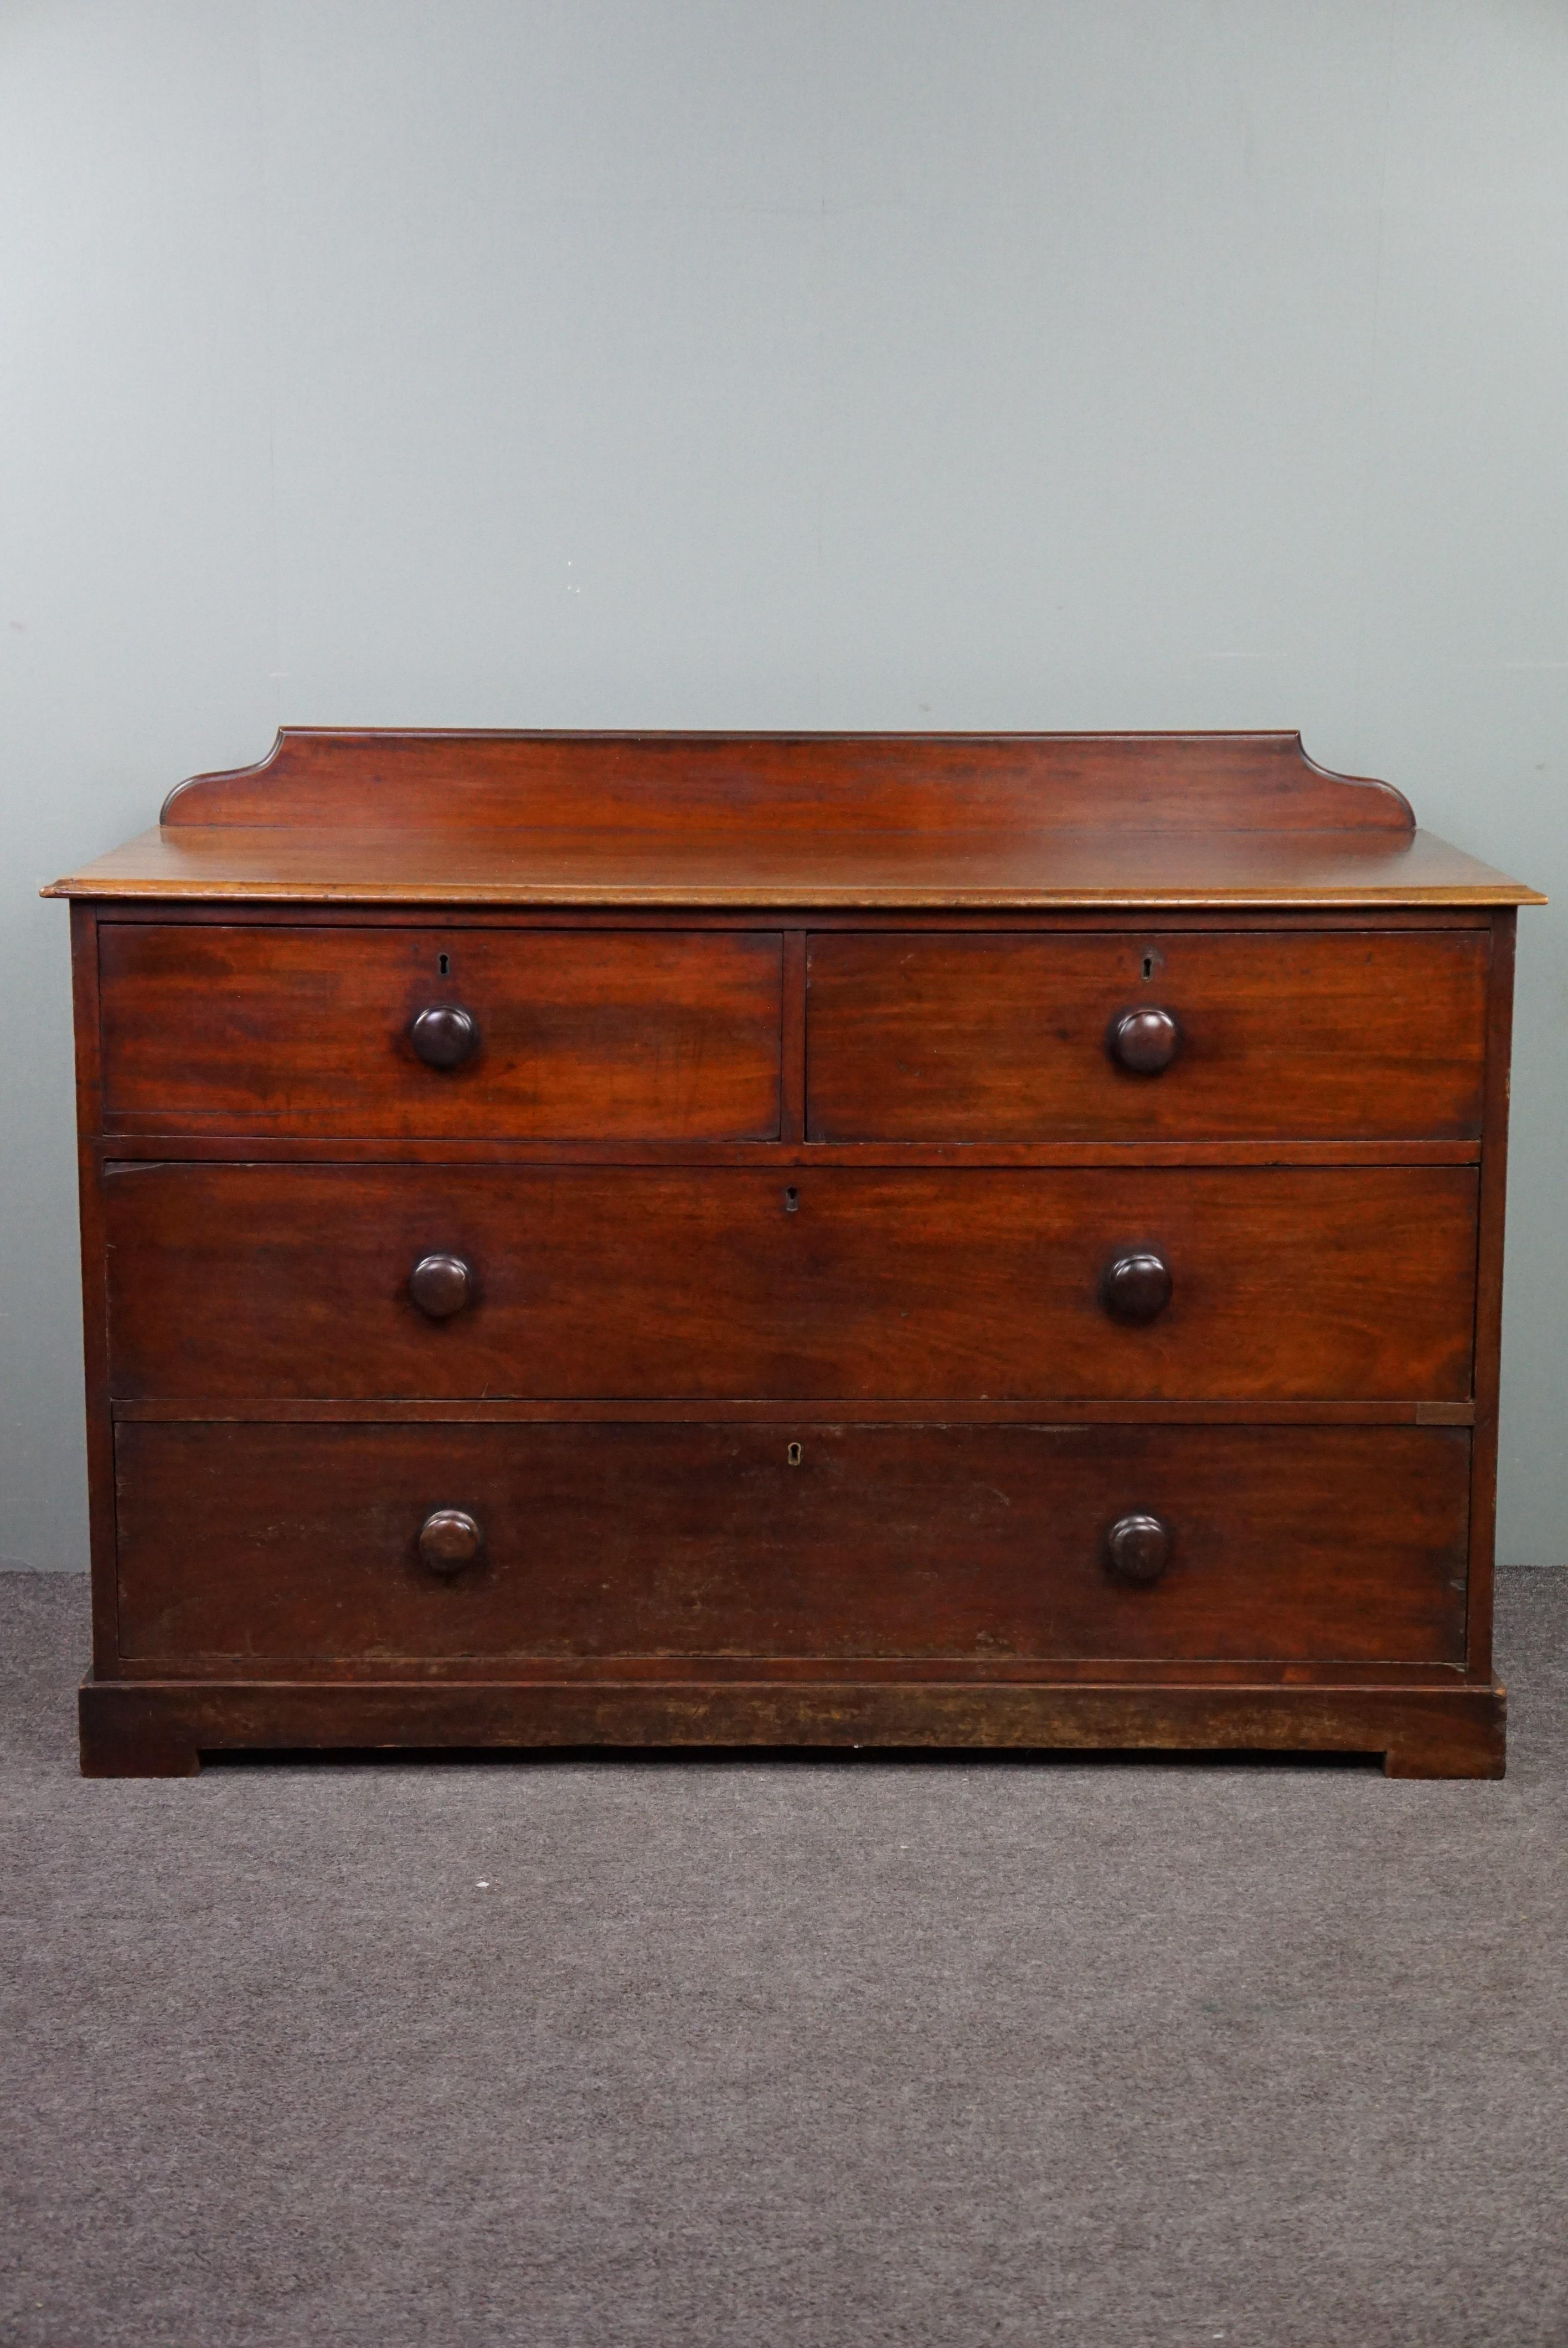 Offered is this beautiful antique chest of drawers with both history and character!

This elegant chest of drawers/chest of drawers from the mid-19th century radiates grandeur and has 3 spacious drawers. In addition, the cabinet has a subtly shaped